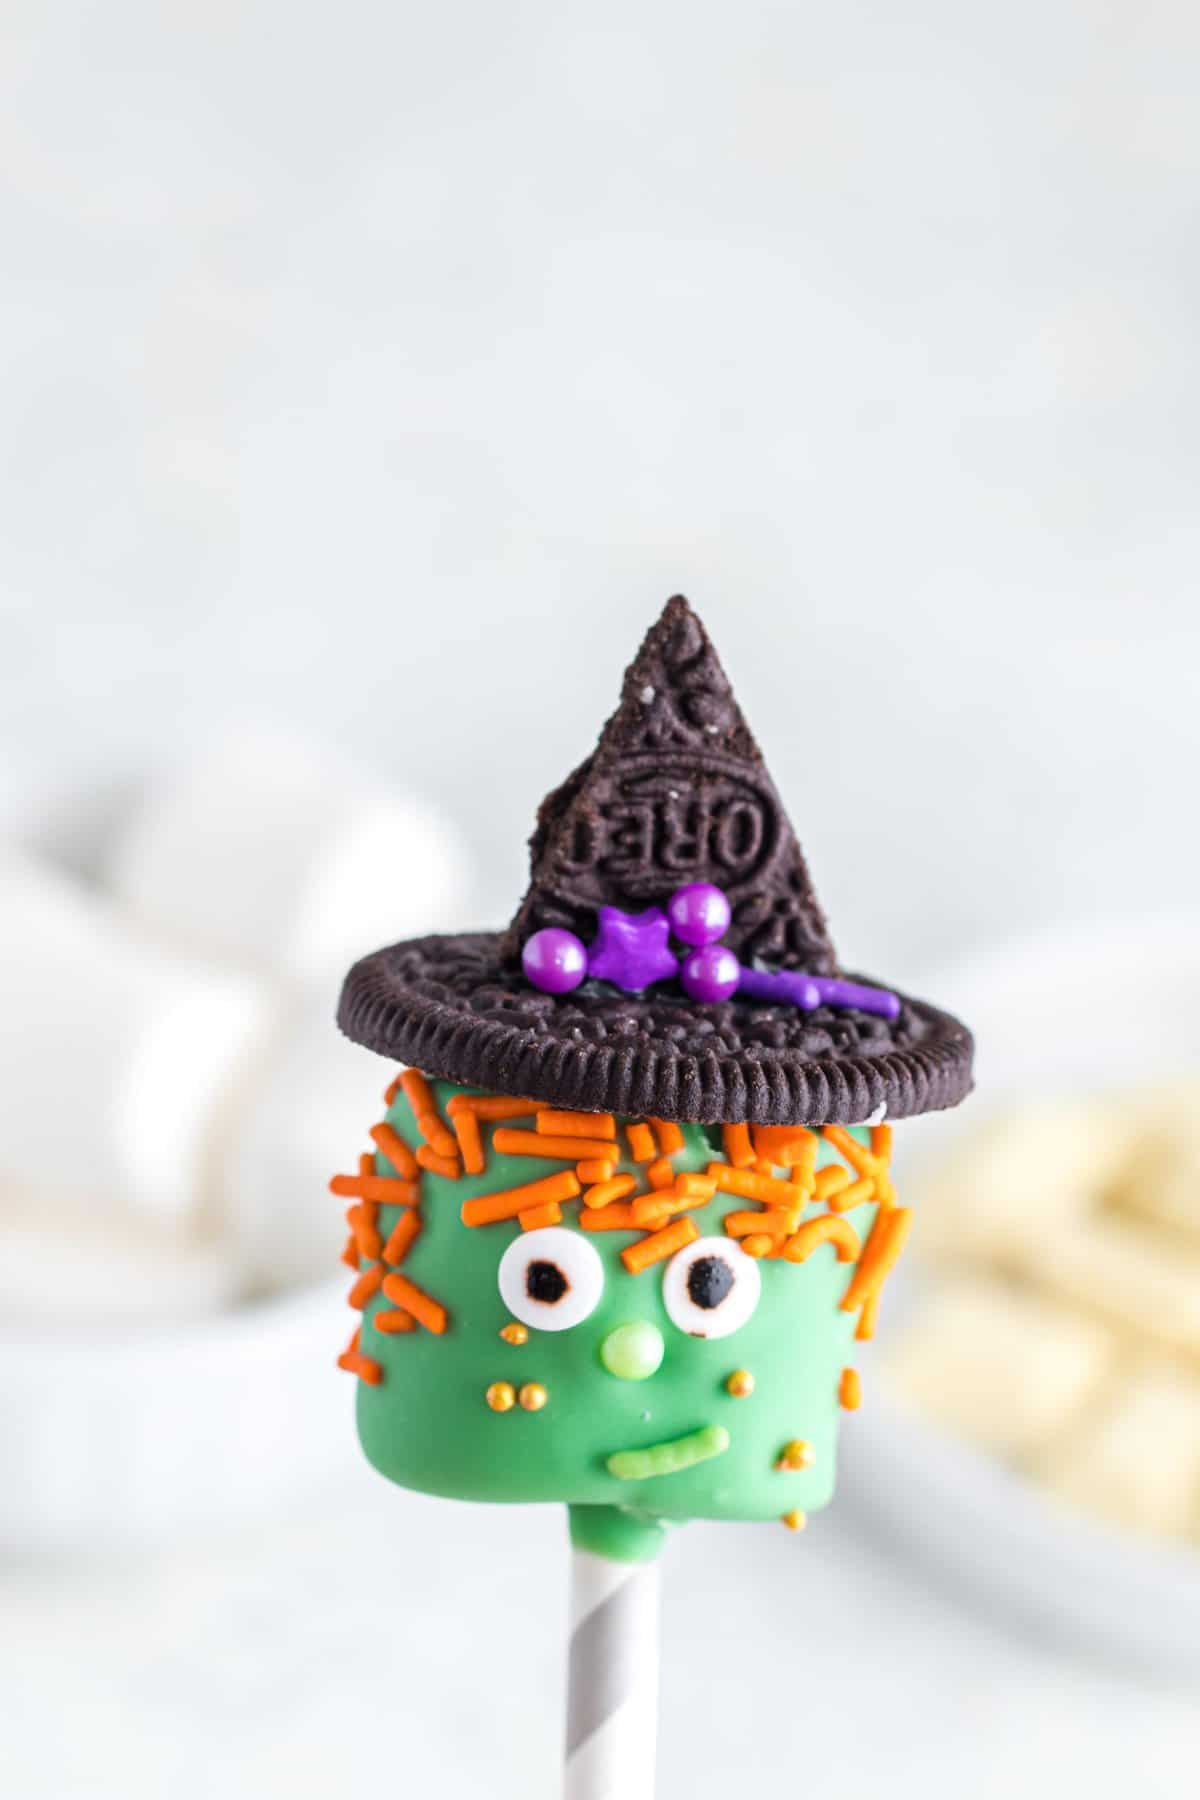 Placing the hat and orange sprinkles onto the green marshmallow, creating the witch. 